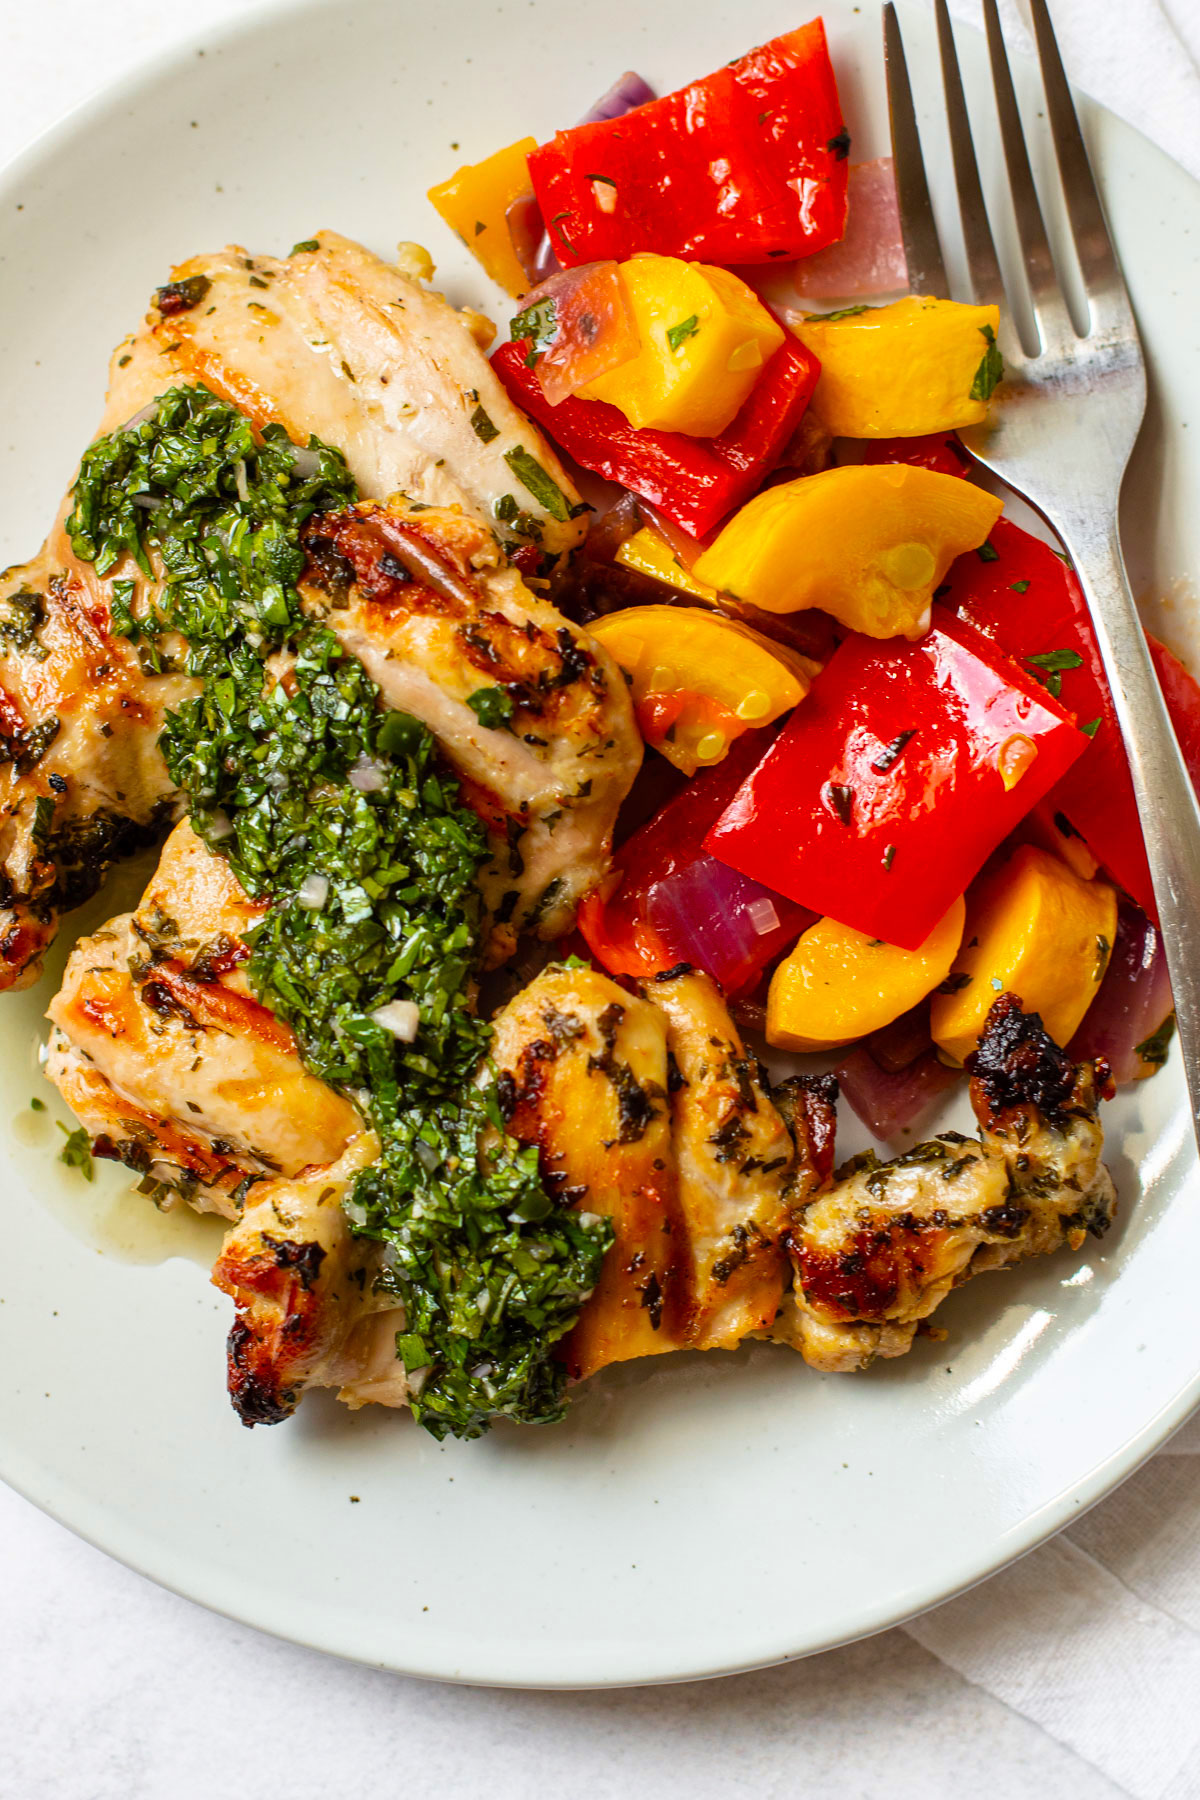 Chimichurri chicken on a plate with veggies.